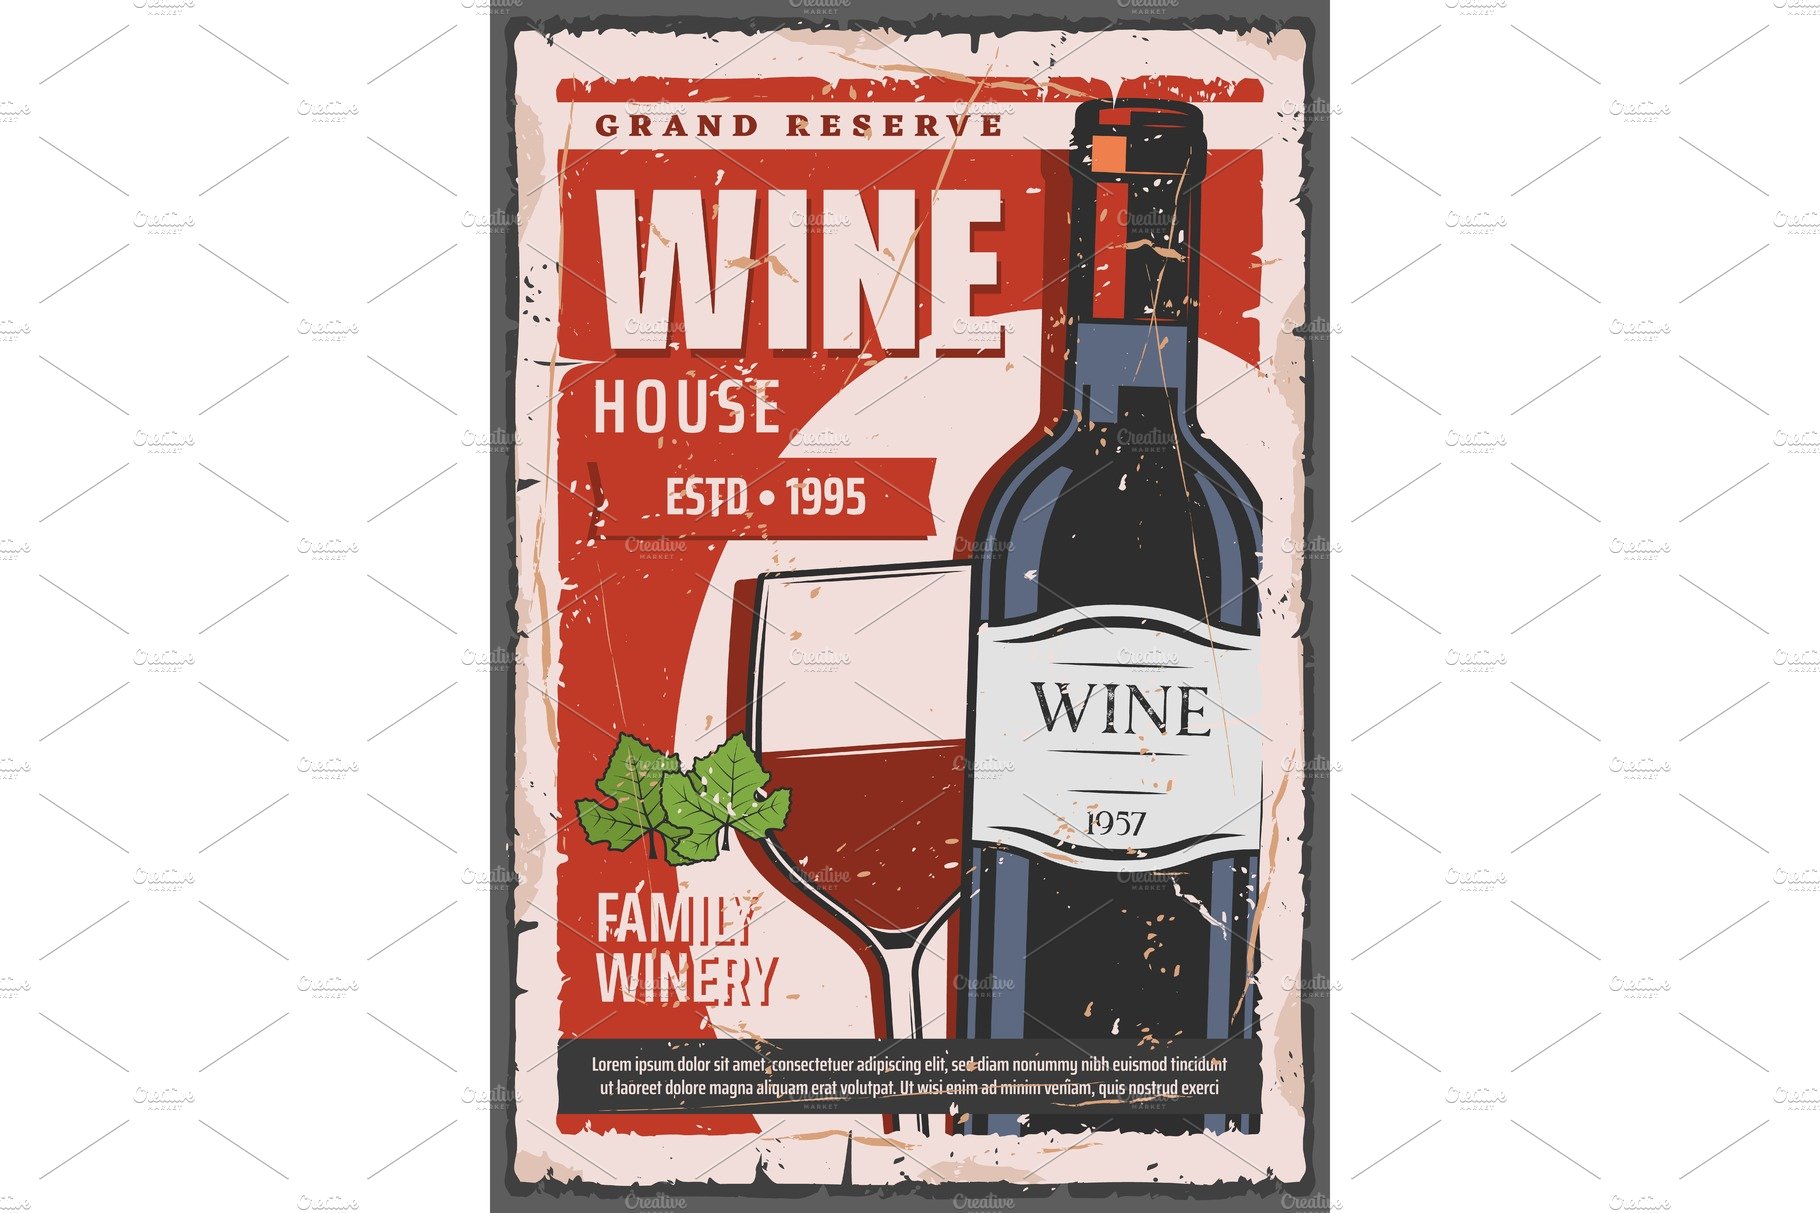 Winery industry, red wine bottle cover image.